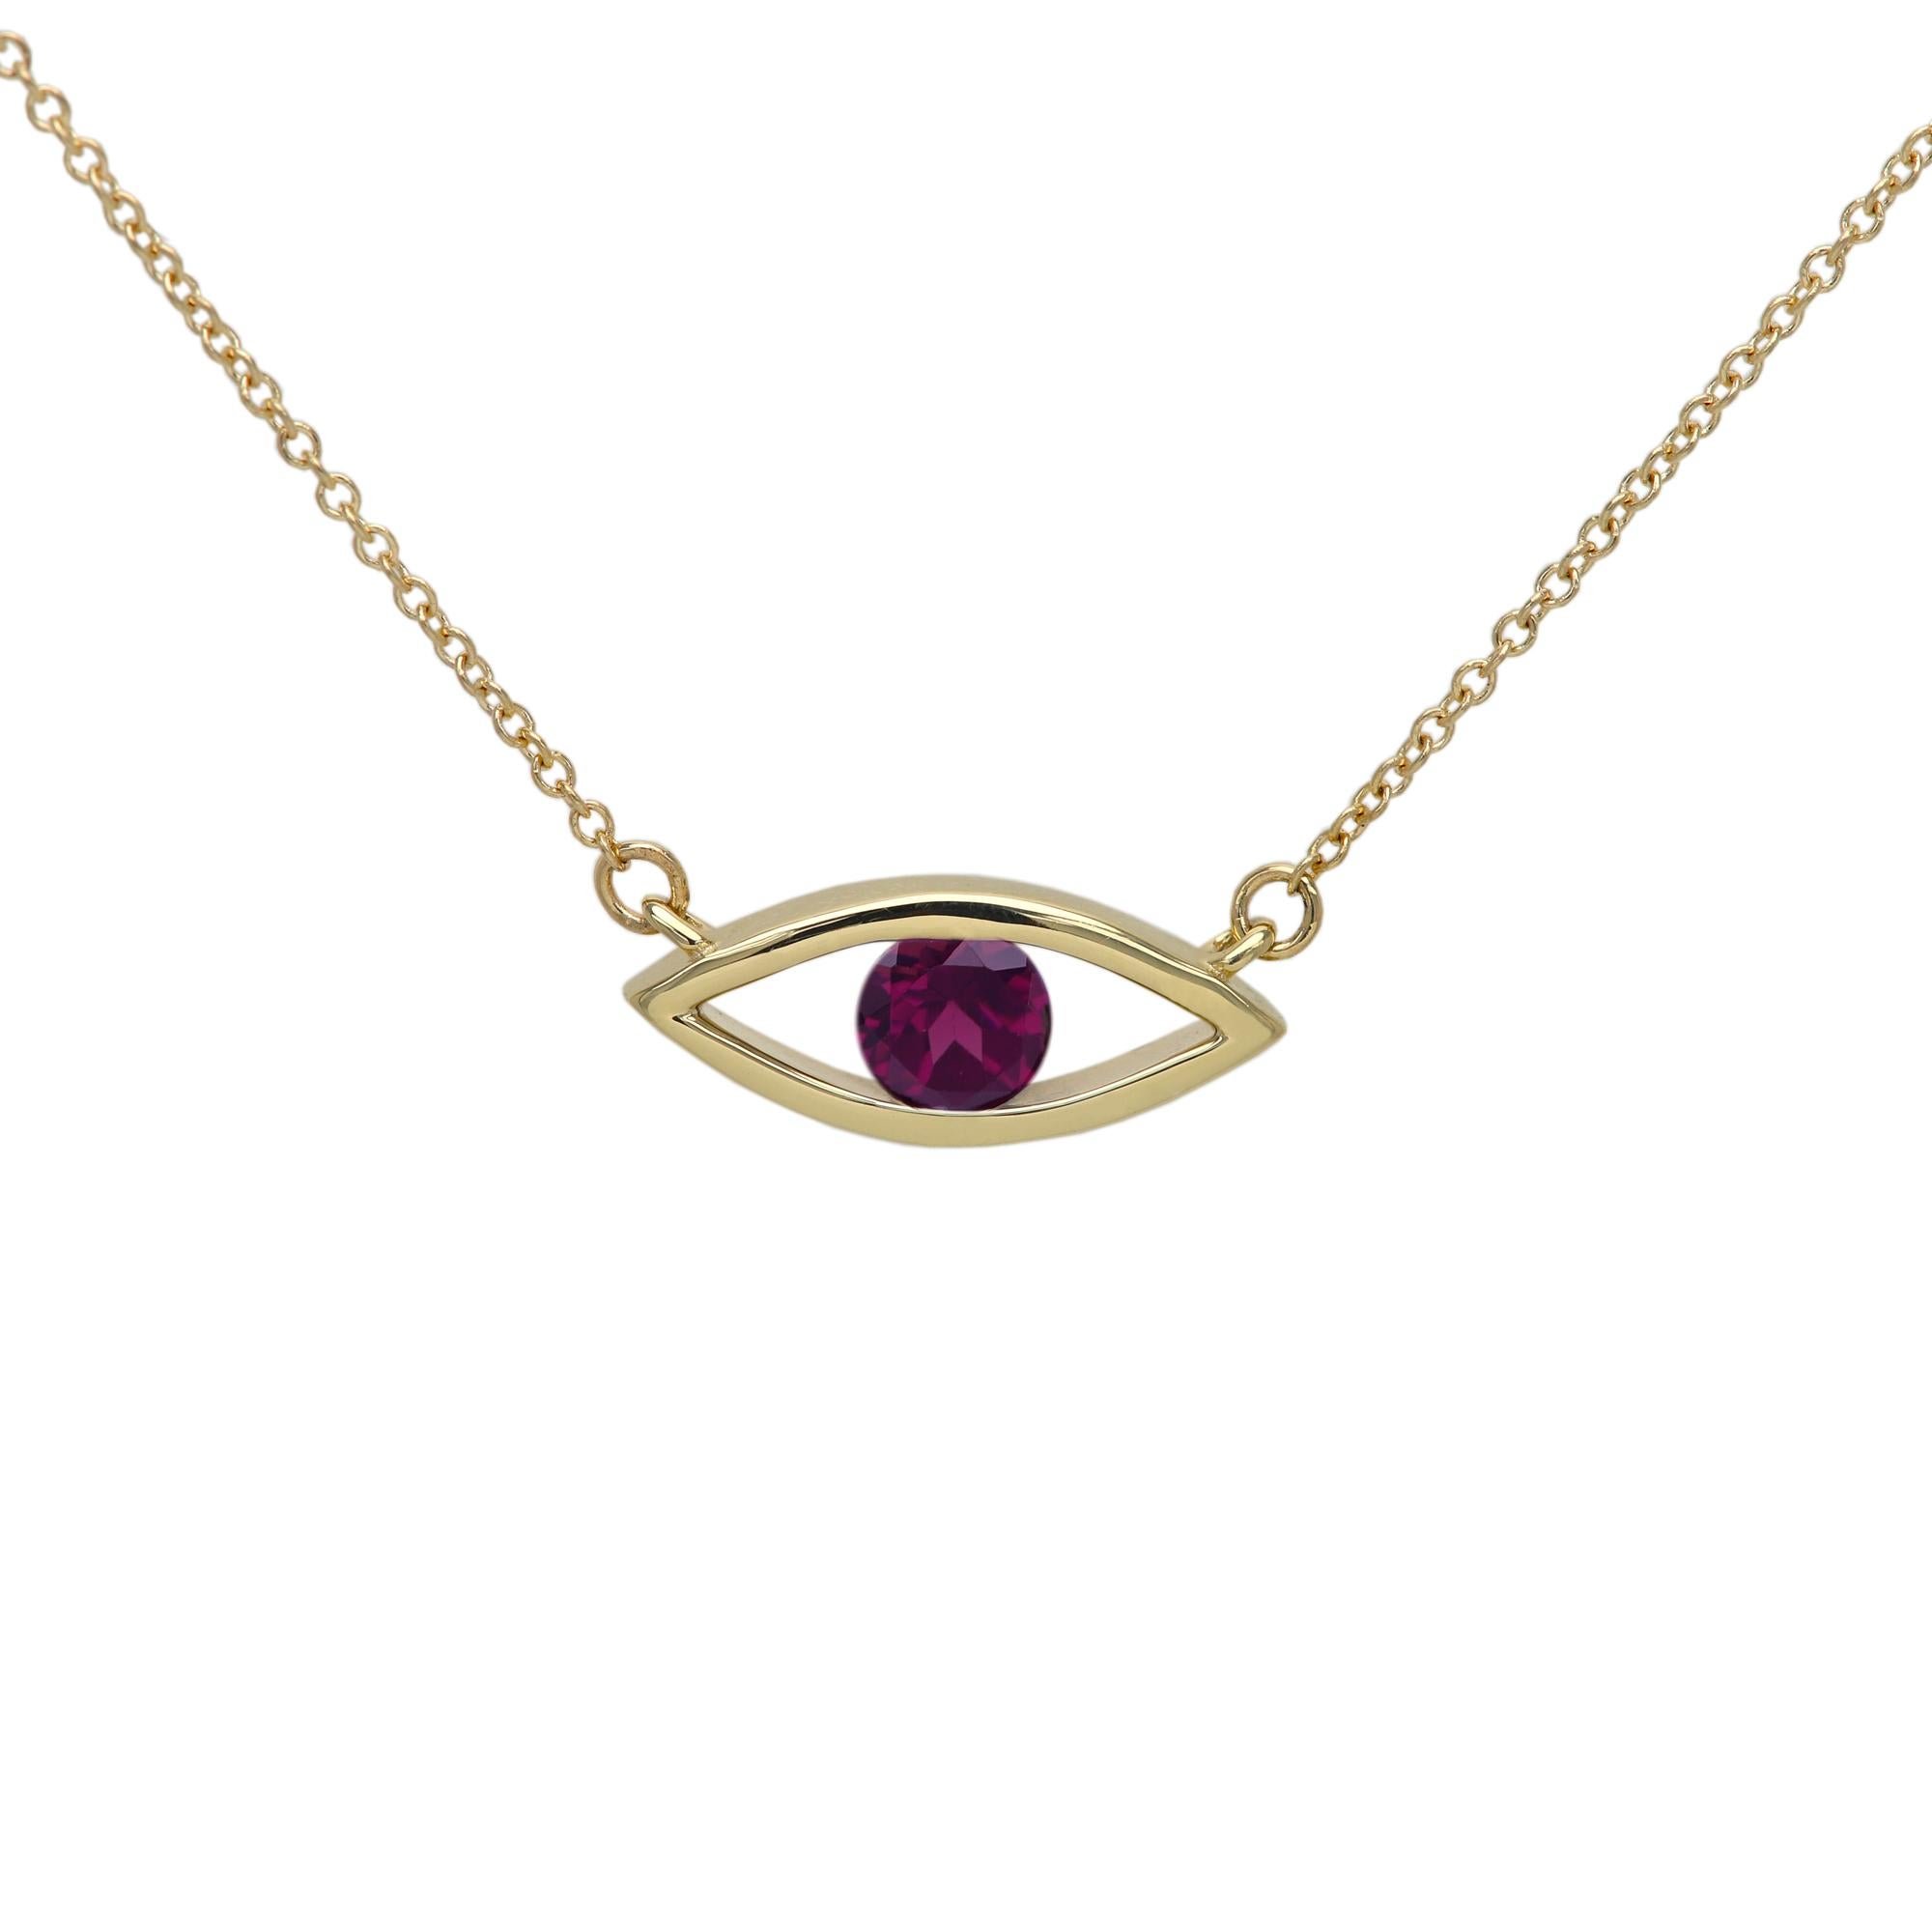 New, Very Elegant & Lovely Evil Eye Birthstone Necklace Solid 14k Yellow Gold with Natural Rhodolite gemstone 
Set in Yellow Gold Evil Eye - Good Luck & protection Necklace
Classic Cable Chain and Lobster Lock - all 14k, 
Chain Length - as your own